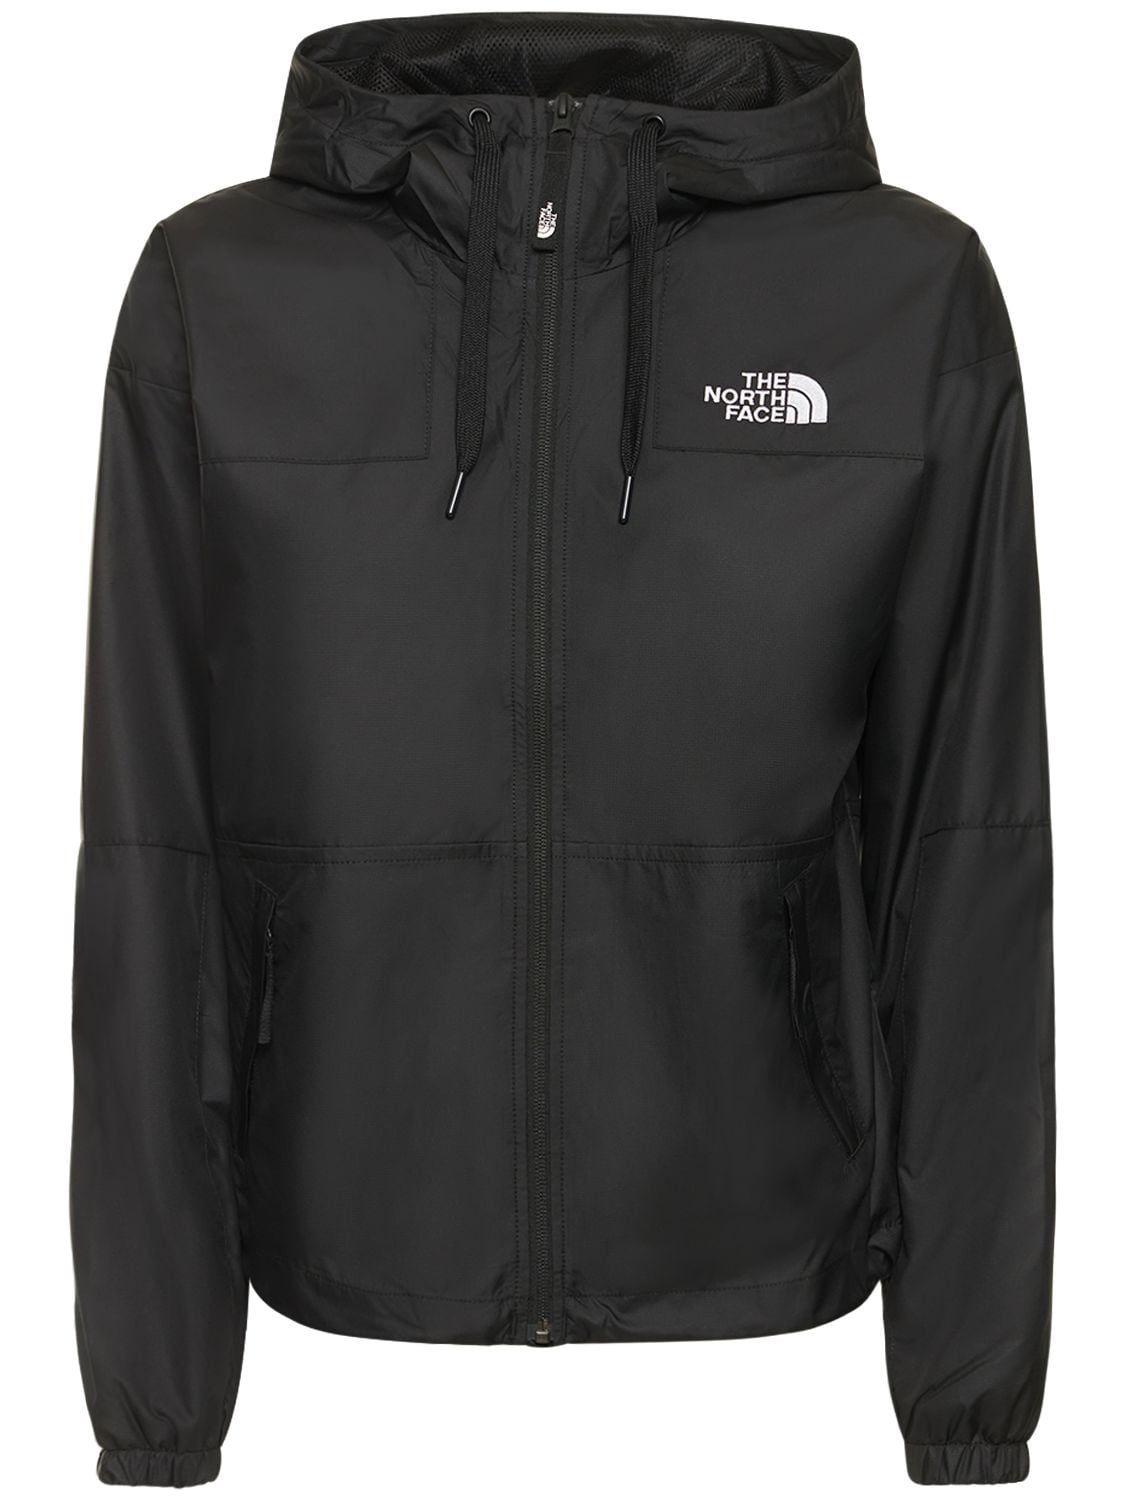 The North Face Sheru Nylon Jacket With Hood in Black | Lyst